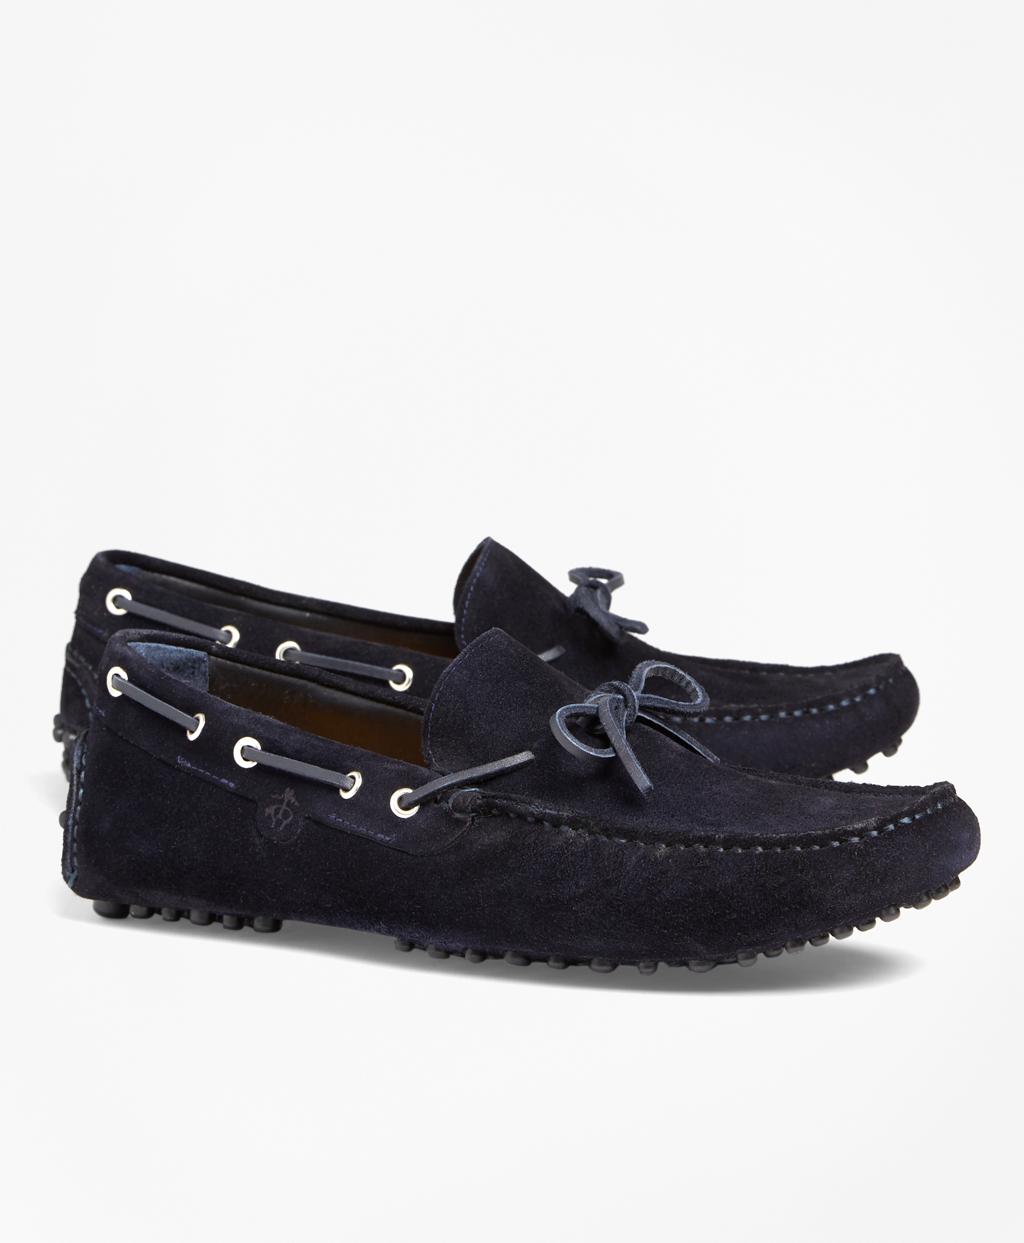 Lyst - Brooks Brothers Suede Driving Mocs in Blue for Men